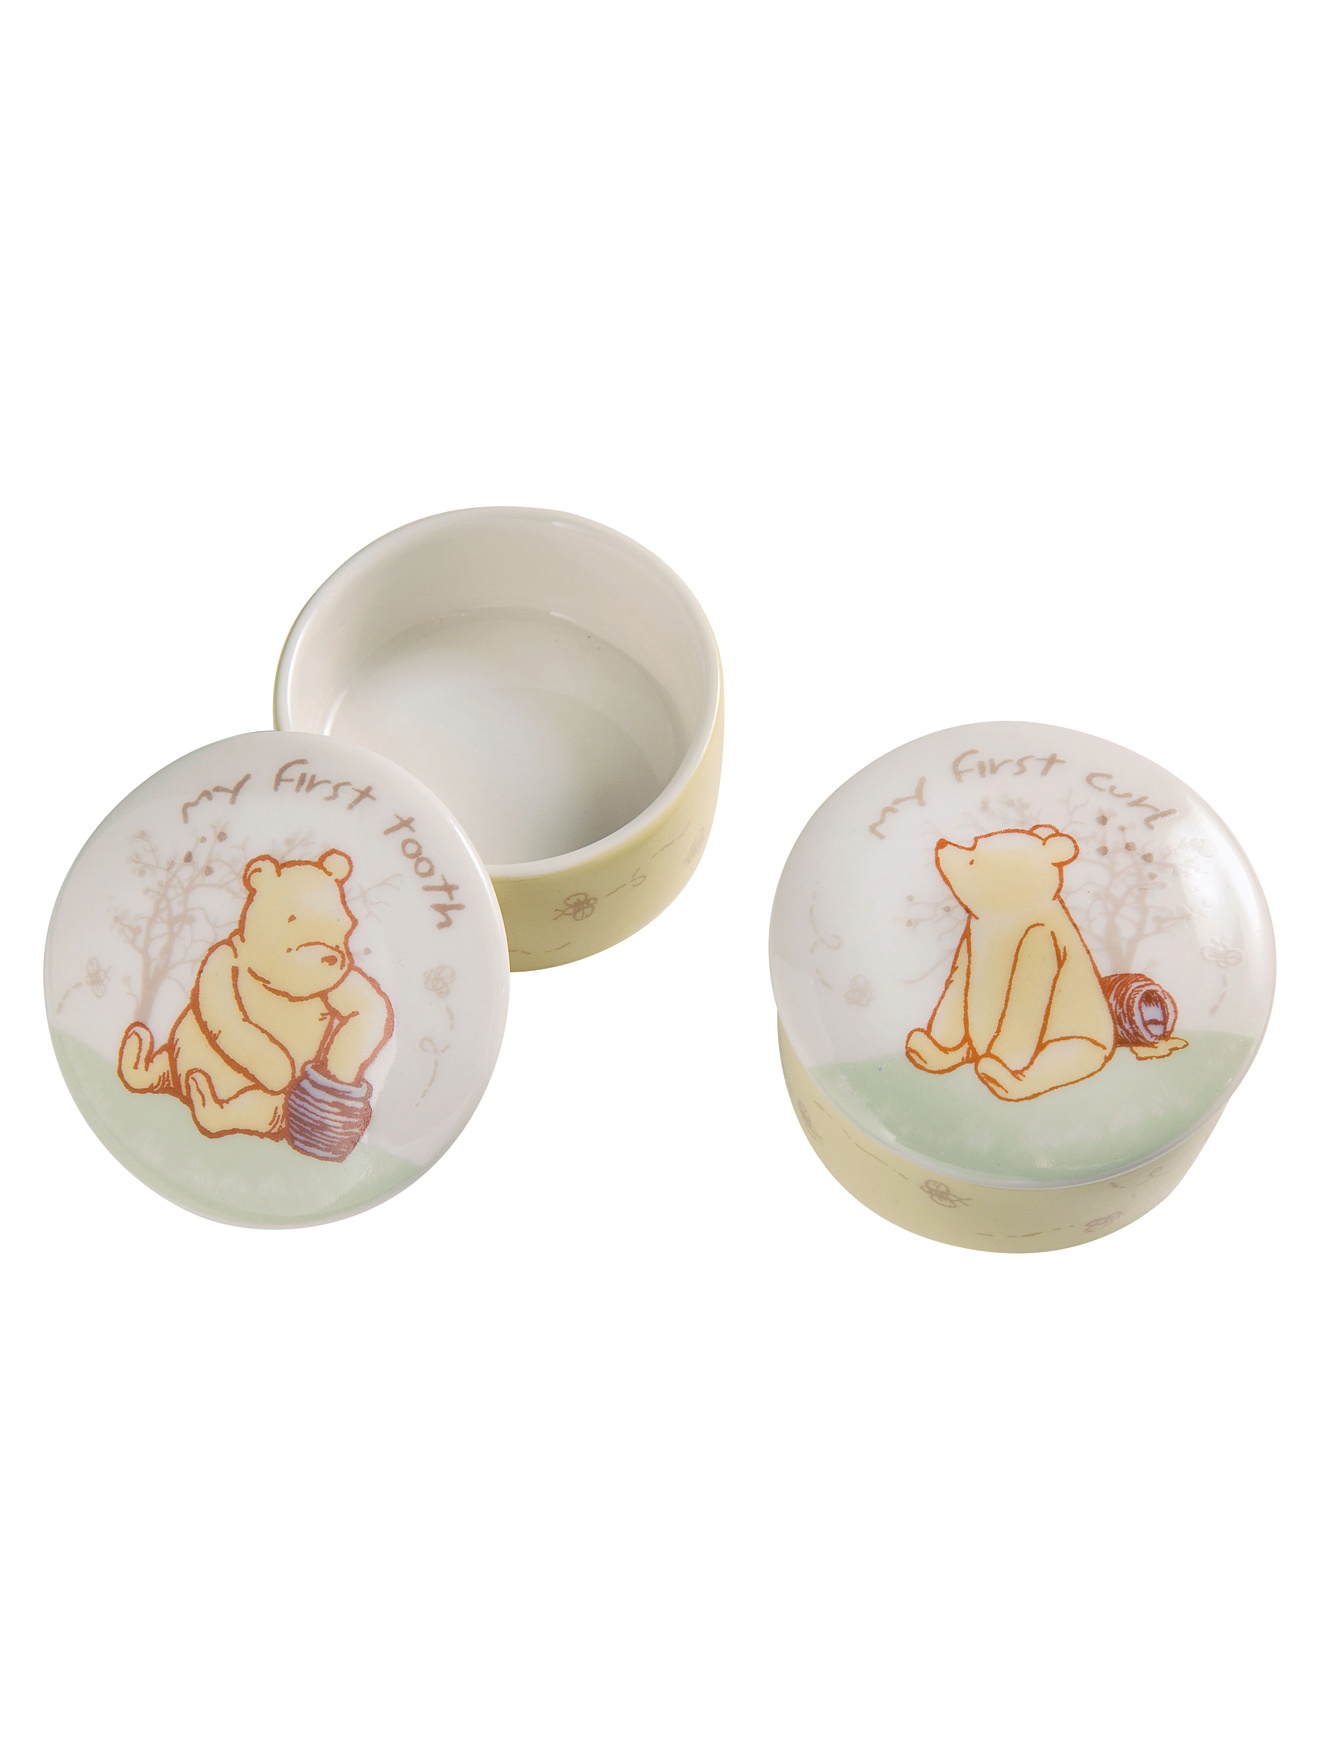 The Pooh 1st Tooth/1st Curl Keepsake Boxes